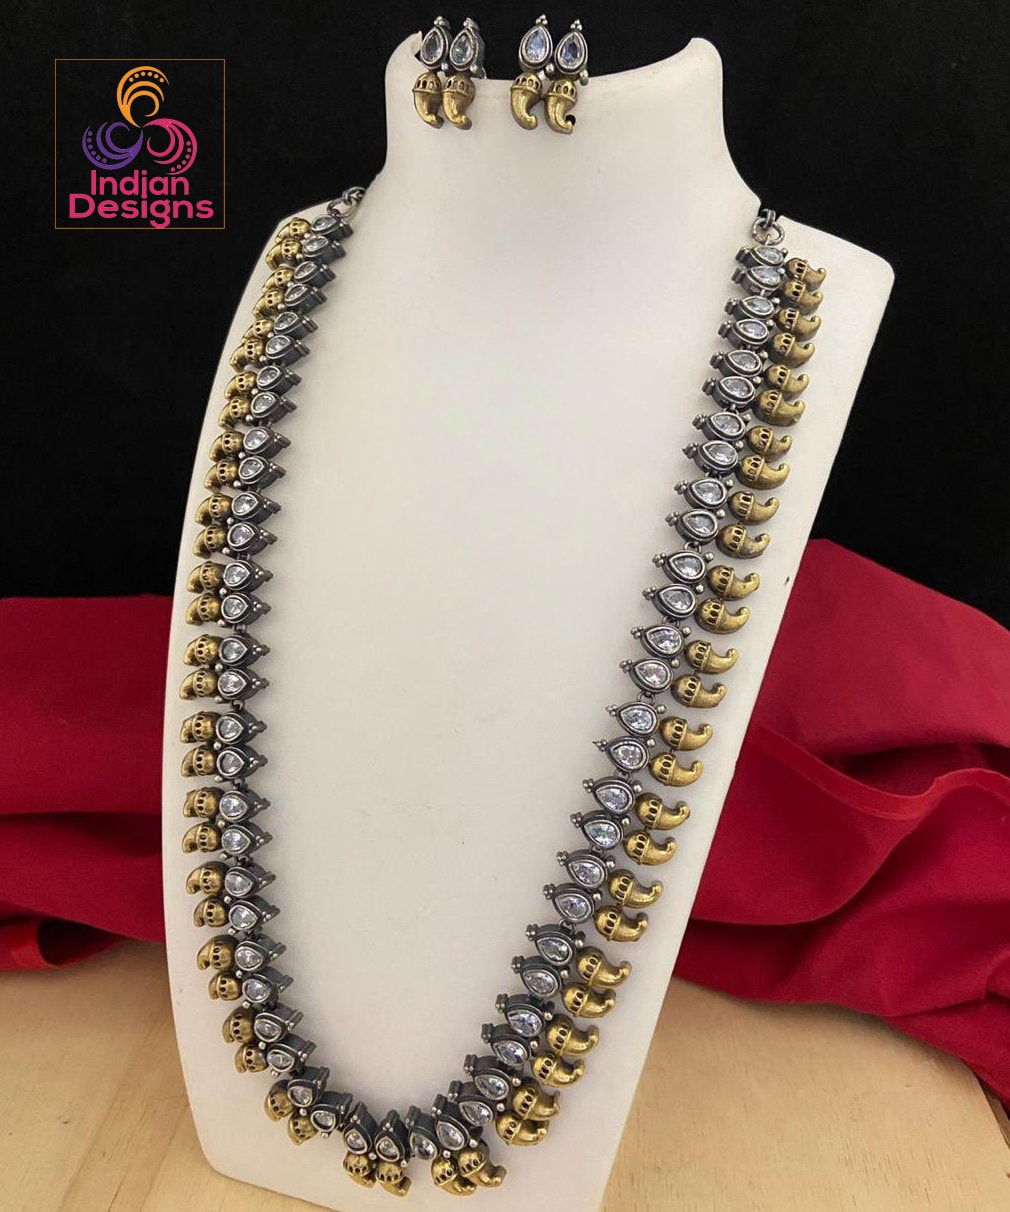 Oxidized Silver Two tone Long necklace, Indian Wedding Jewelry, German Silver necklace and Earrings, Long necklace for saree, Antique silver-Gold tone necklace, Indian Temple jewelry